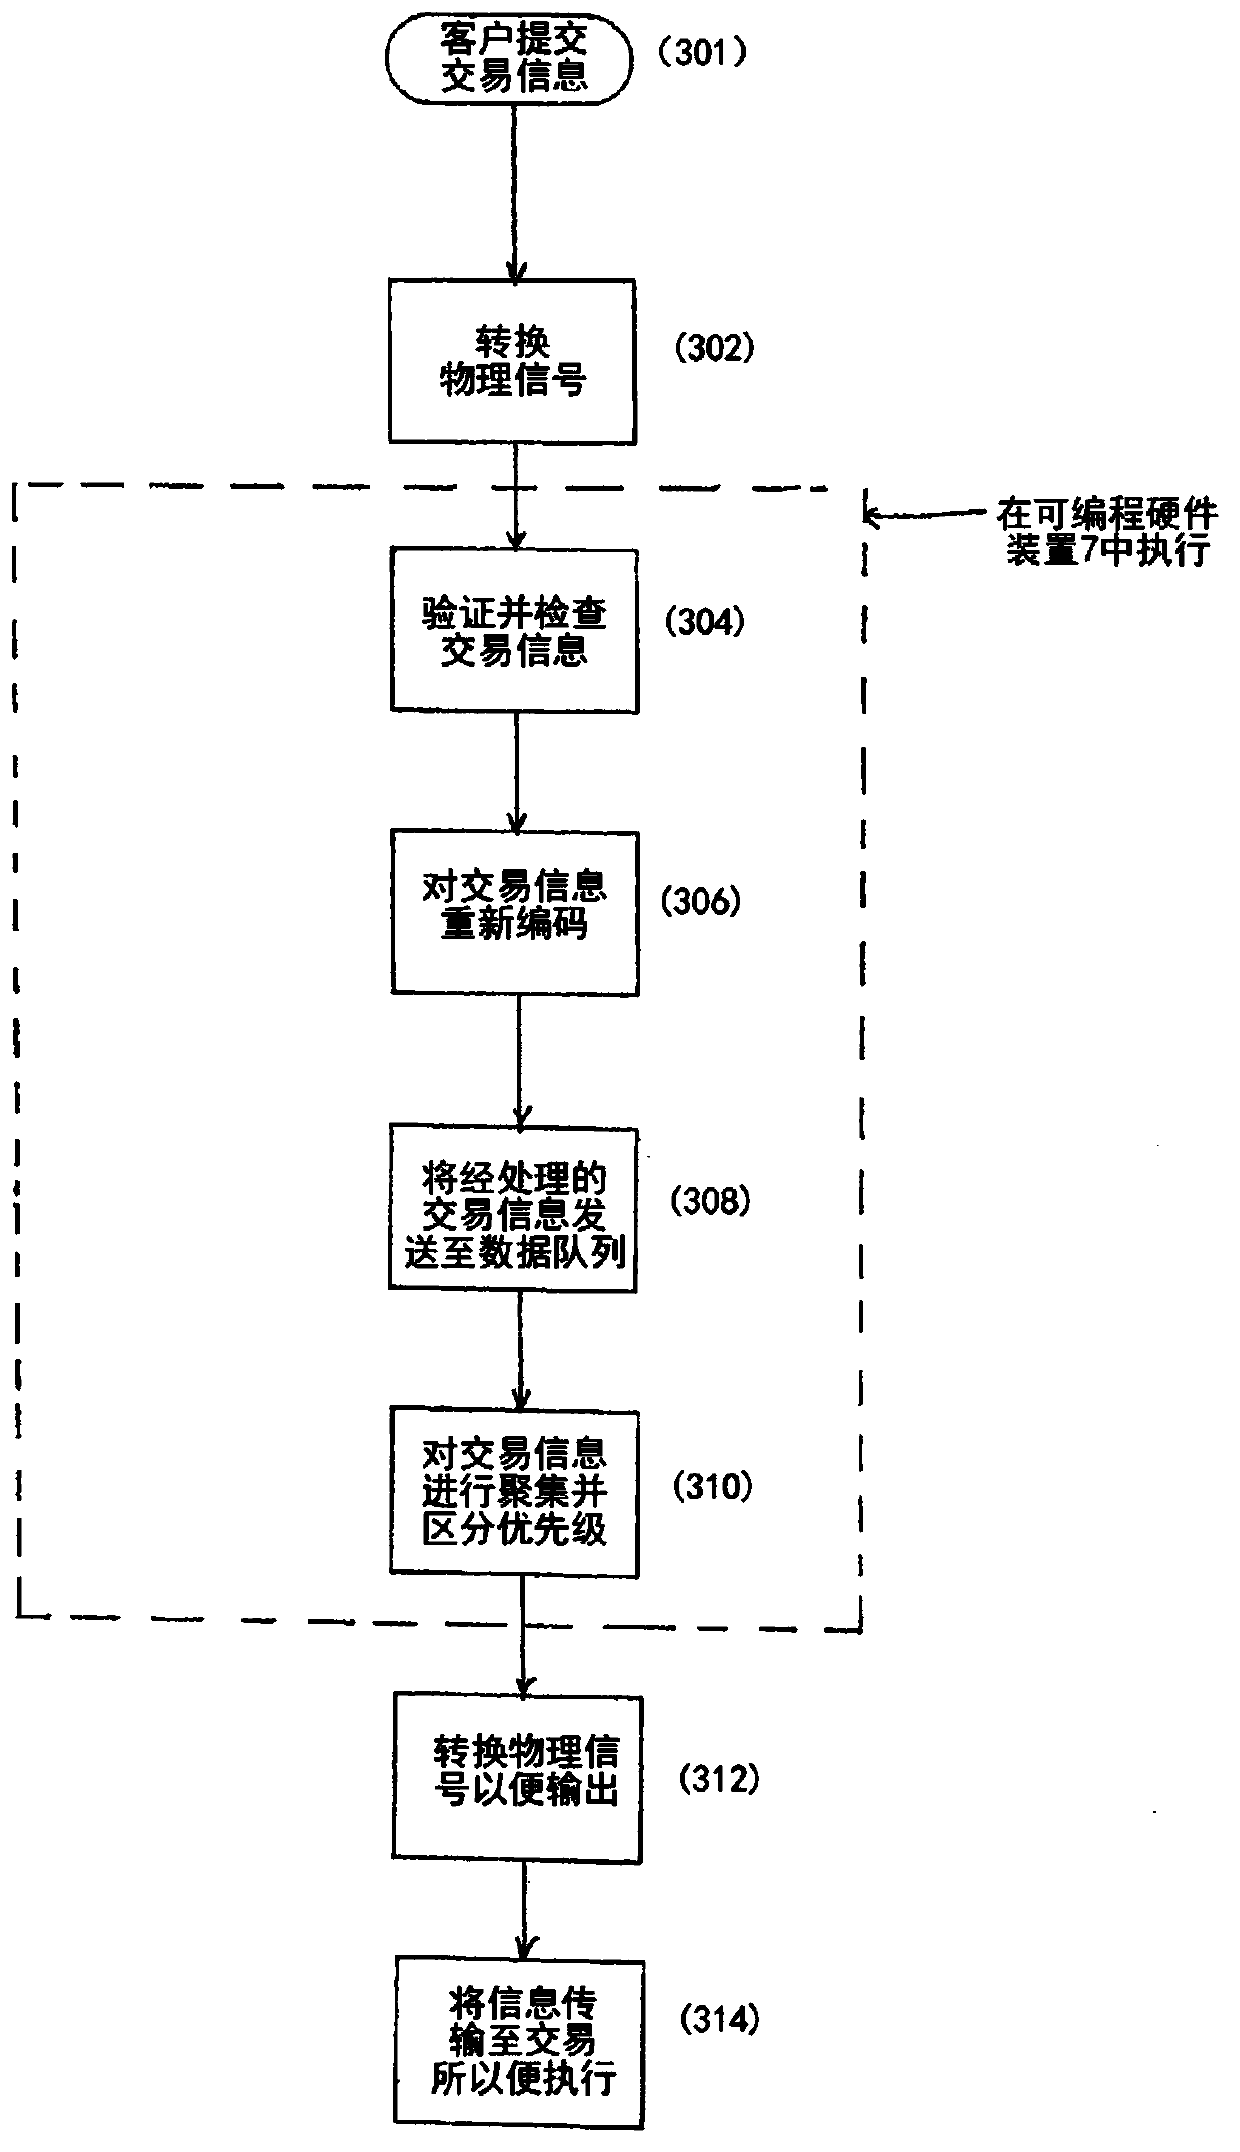 A market access system and method